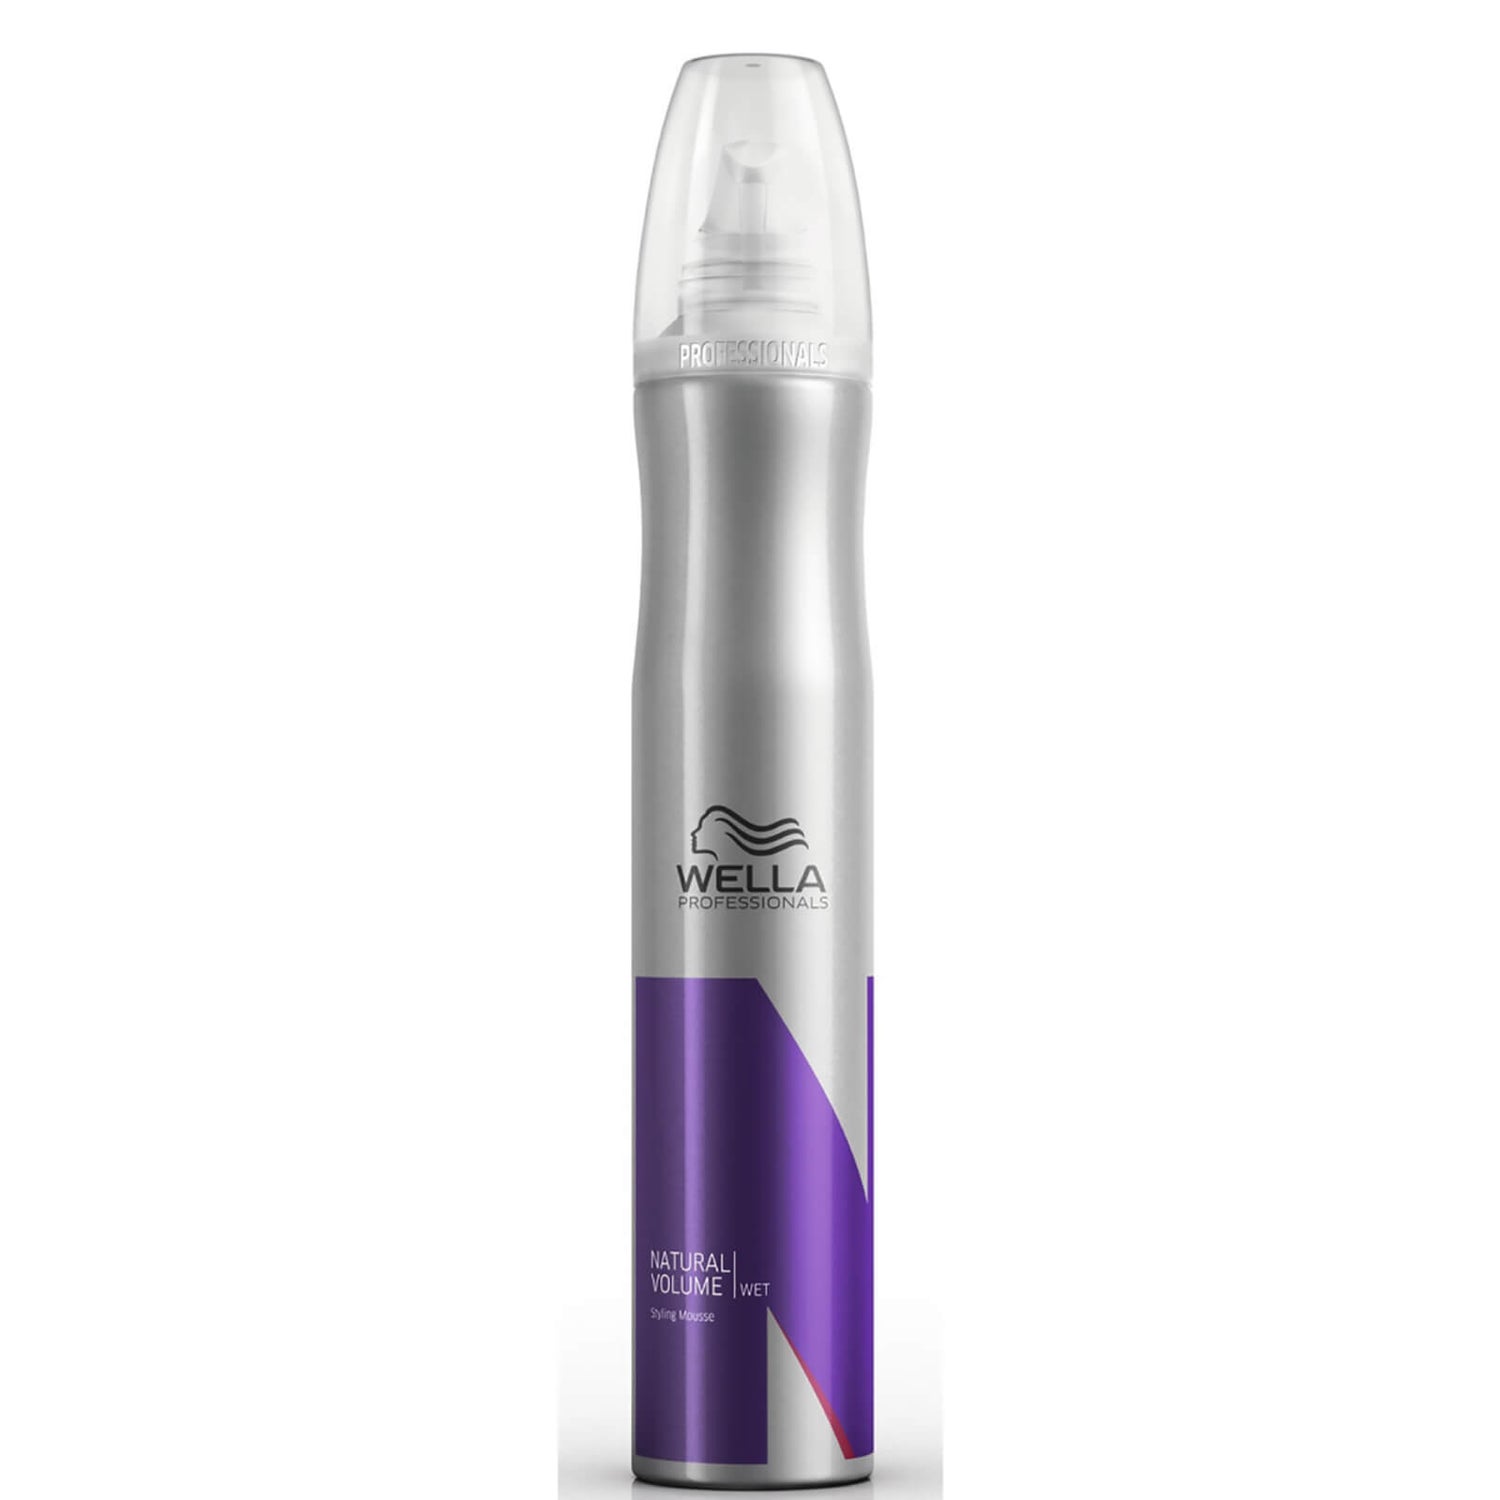 WELLA PROFESSIONALS WET NATURAL VOLUME STYLING MOUSSE (300ML)